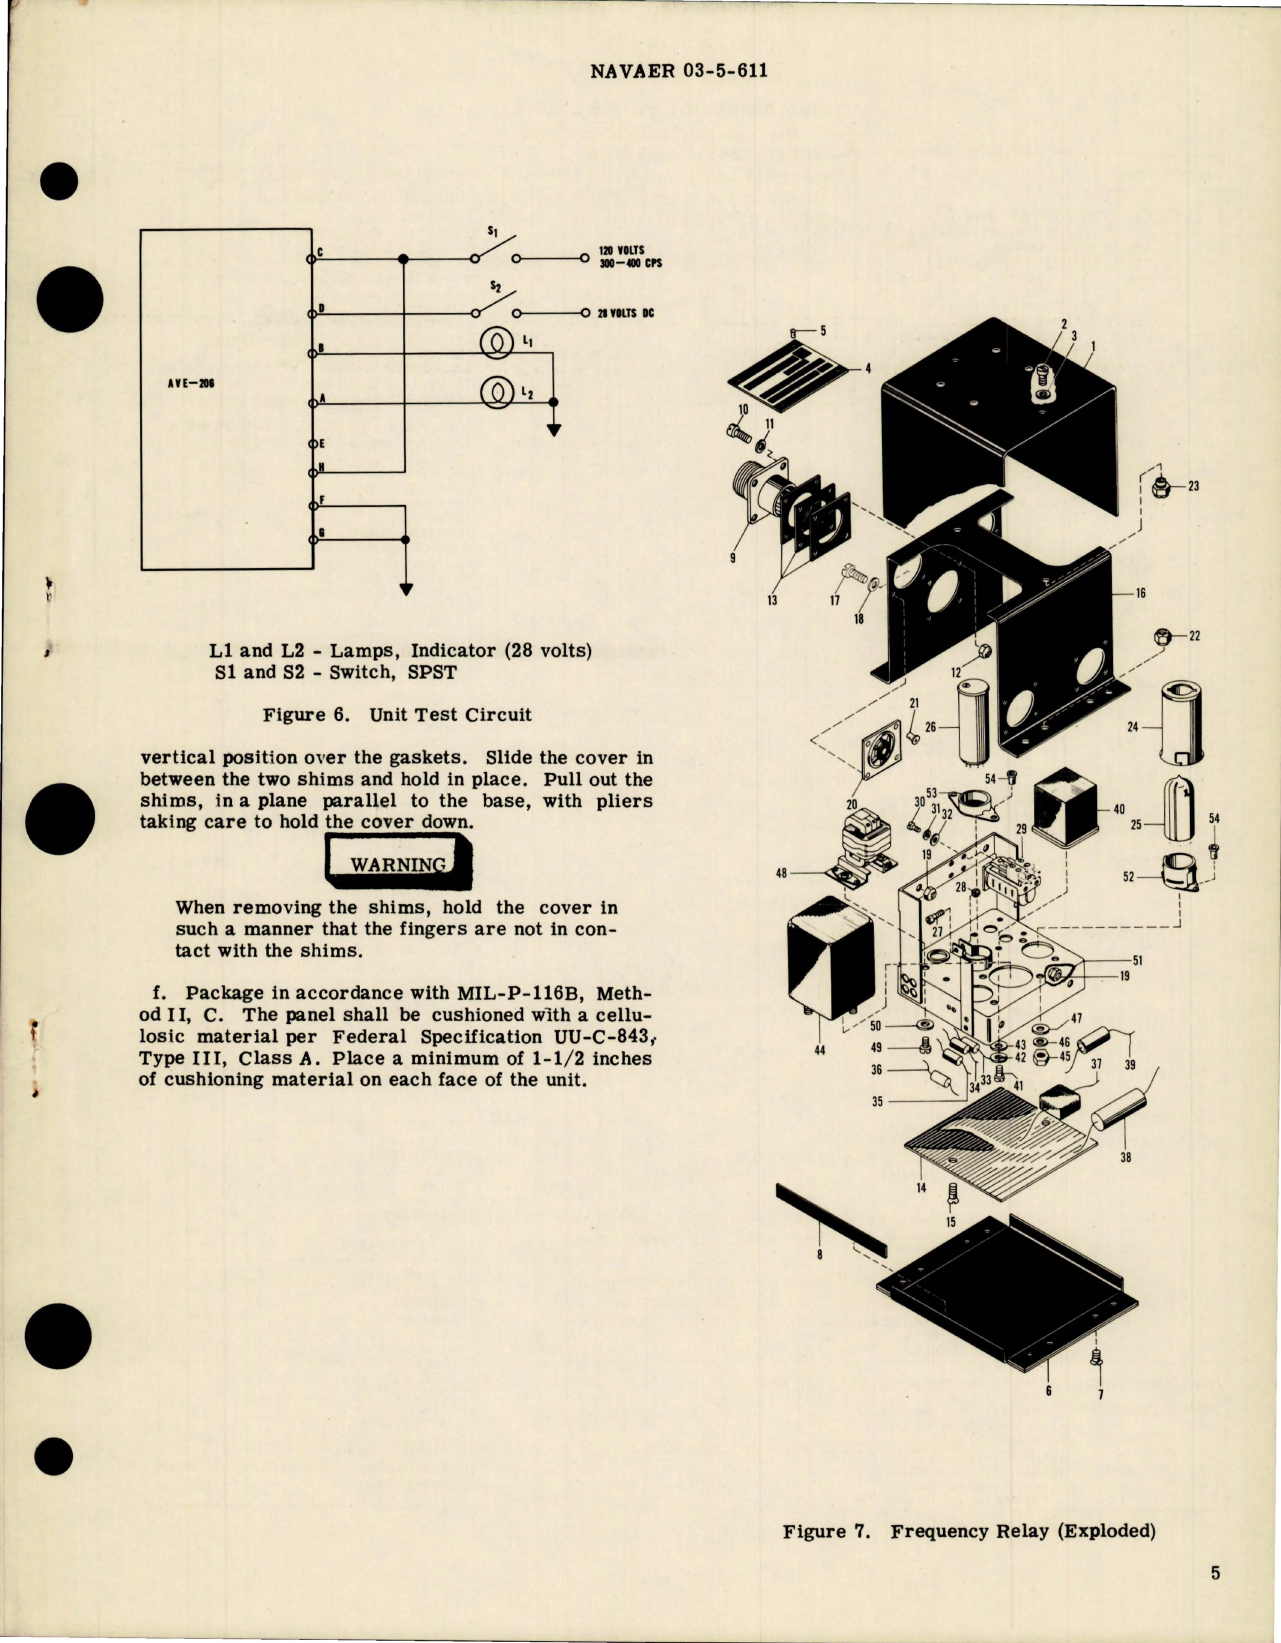 Sample page 5 from AirCorps Library document: Overhaul Instructions with Parts Breakdown for Frequency Relay - Parts A28A8993-3 - Type AVE-206